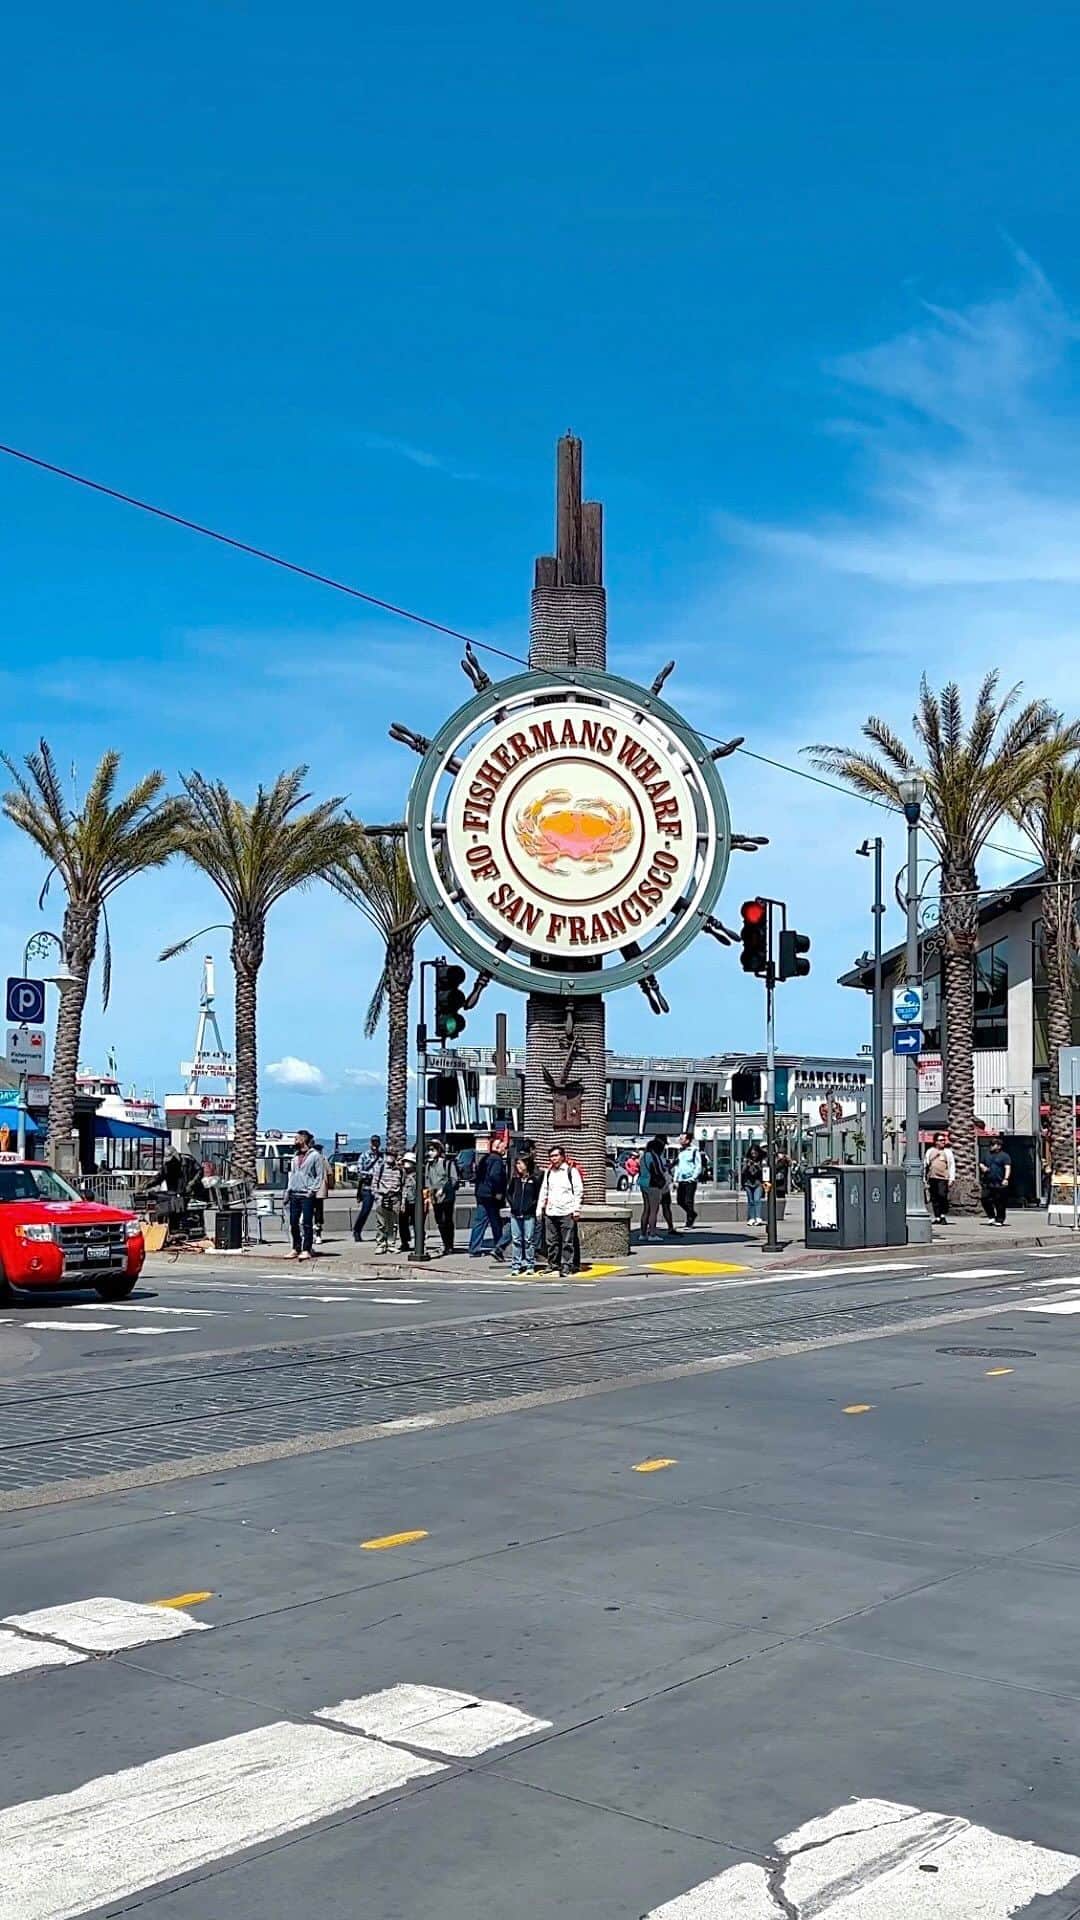 Visit The USAのインスタグラム：「If you go on vacation to San Francisco, California, and don’t visit Fisherman’s Wharf did you really go to San Francisco? 🤭    Save this post to make your next trip to The Golden City really count:  🦭See the sea lions hang out at Pier 39  🌁Enjoy postcard views of the bay, Alcatraz and the Golden Gate Bridge   🥖Try the iconic clam chowder and other sourdough bread specialties at Boudin  🕹️Play with vintage arcade machines in the Musée Mécanique  #VisitTheUSA #VisitCalifornia #OnlyInSF #SFtravel #GoldenCity #Pier39」